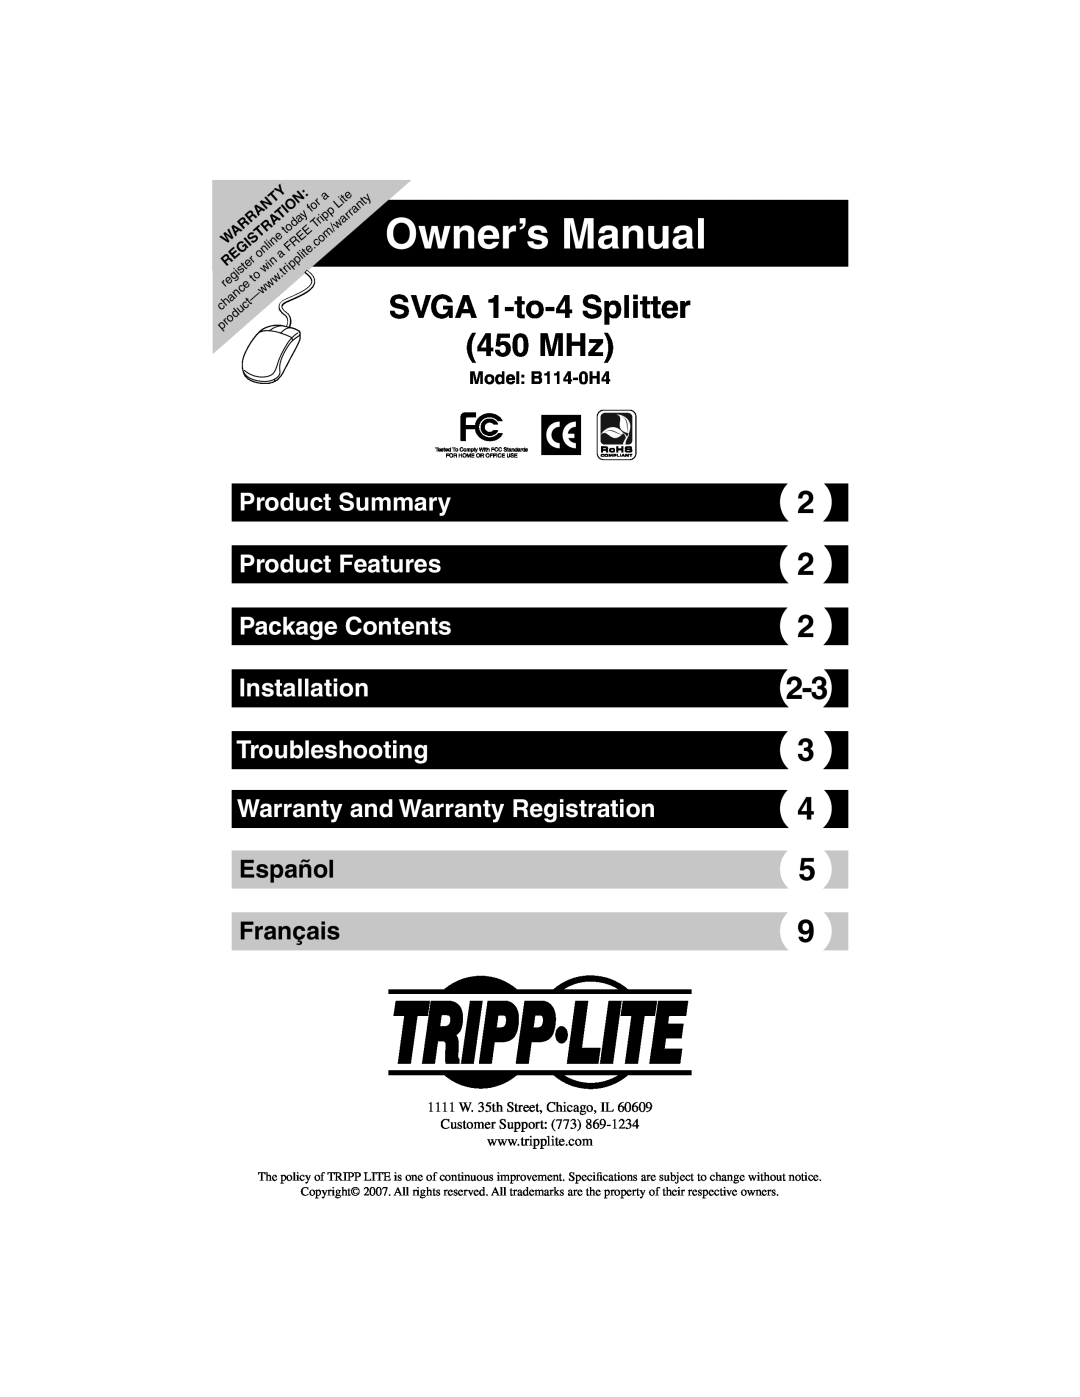 Tripp Lite B114-0H4 owner manual Product Summary Product Features Package Contents Installation, Owner’s Manual 